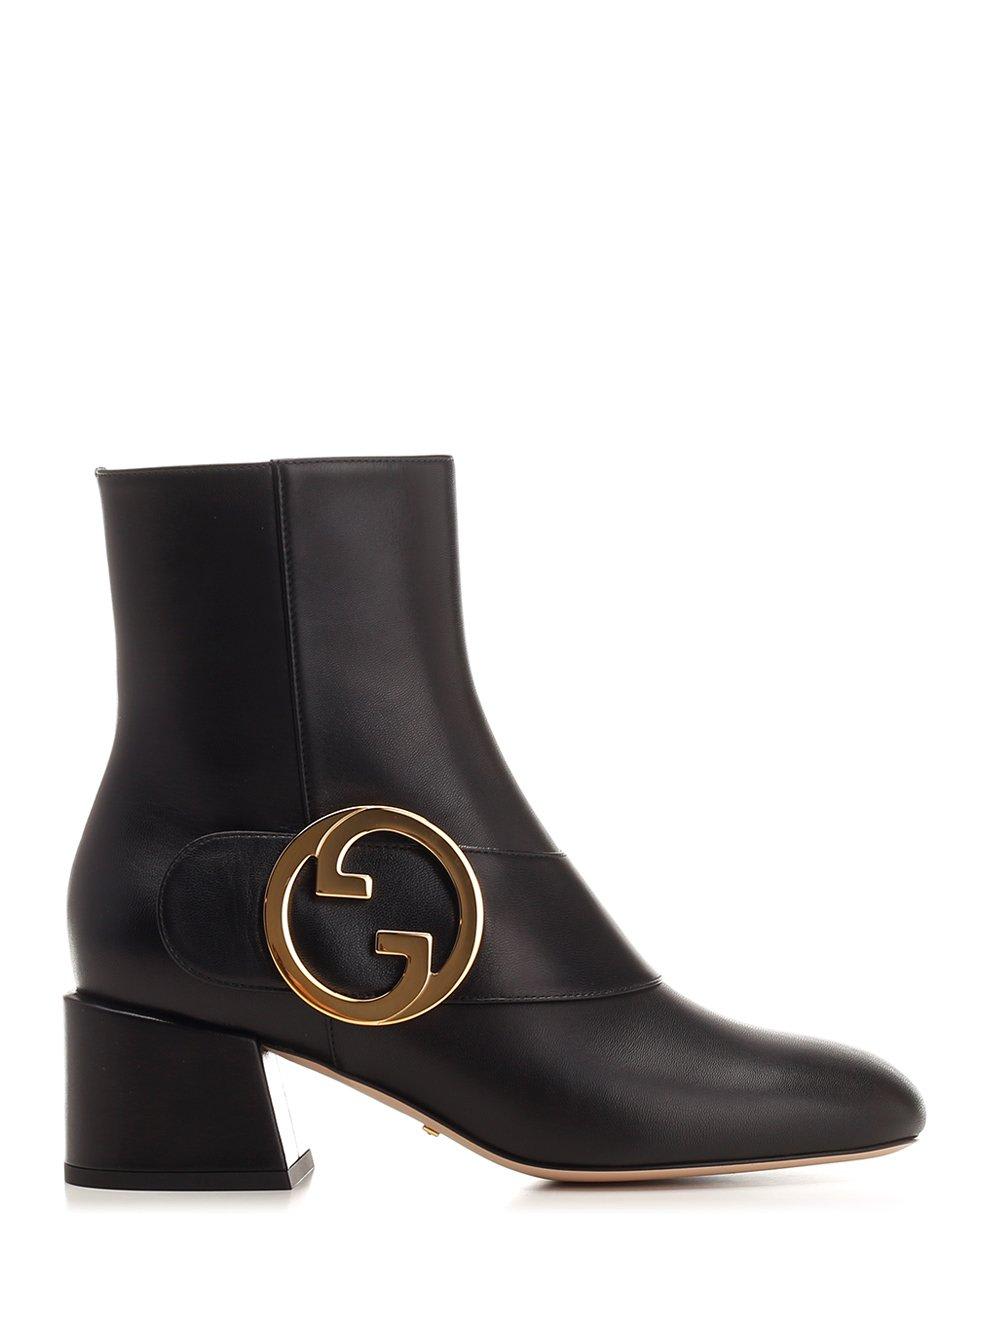 GUCCI BLONDIE SQUARE TOE ANKLE BOOTS